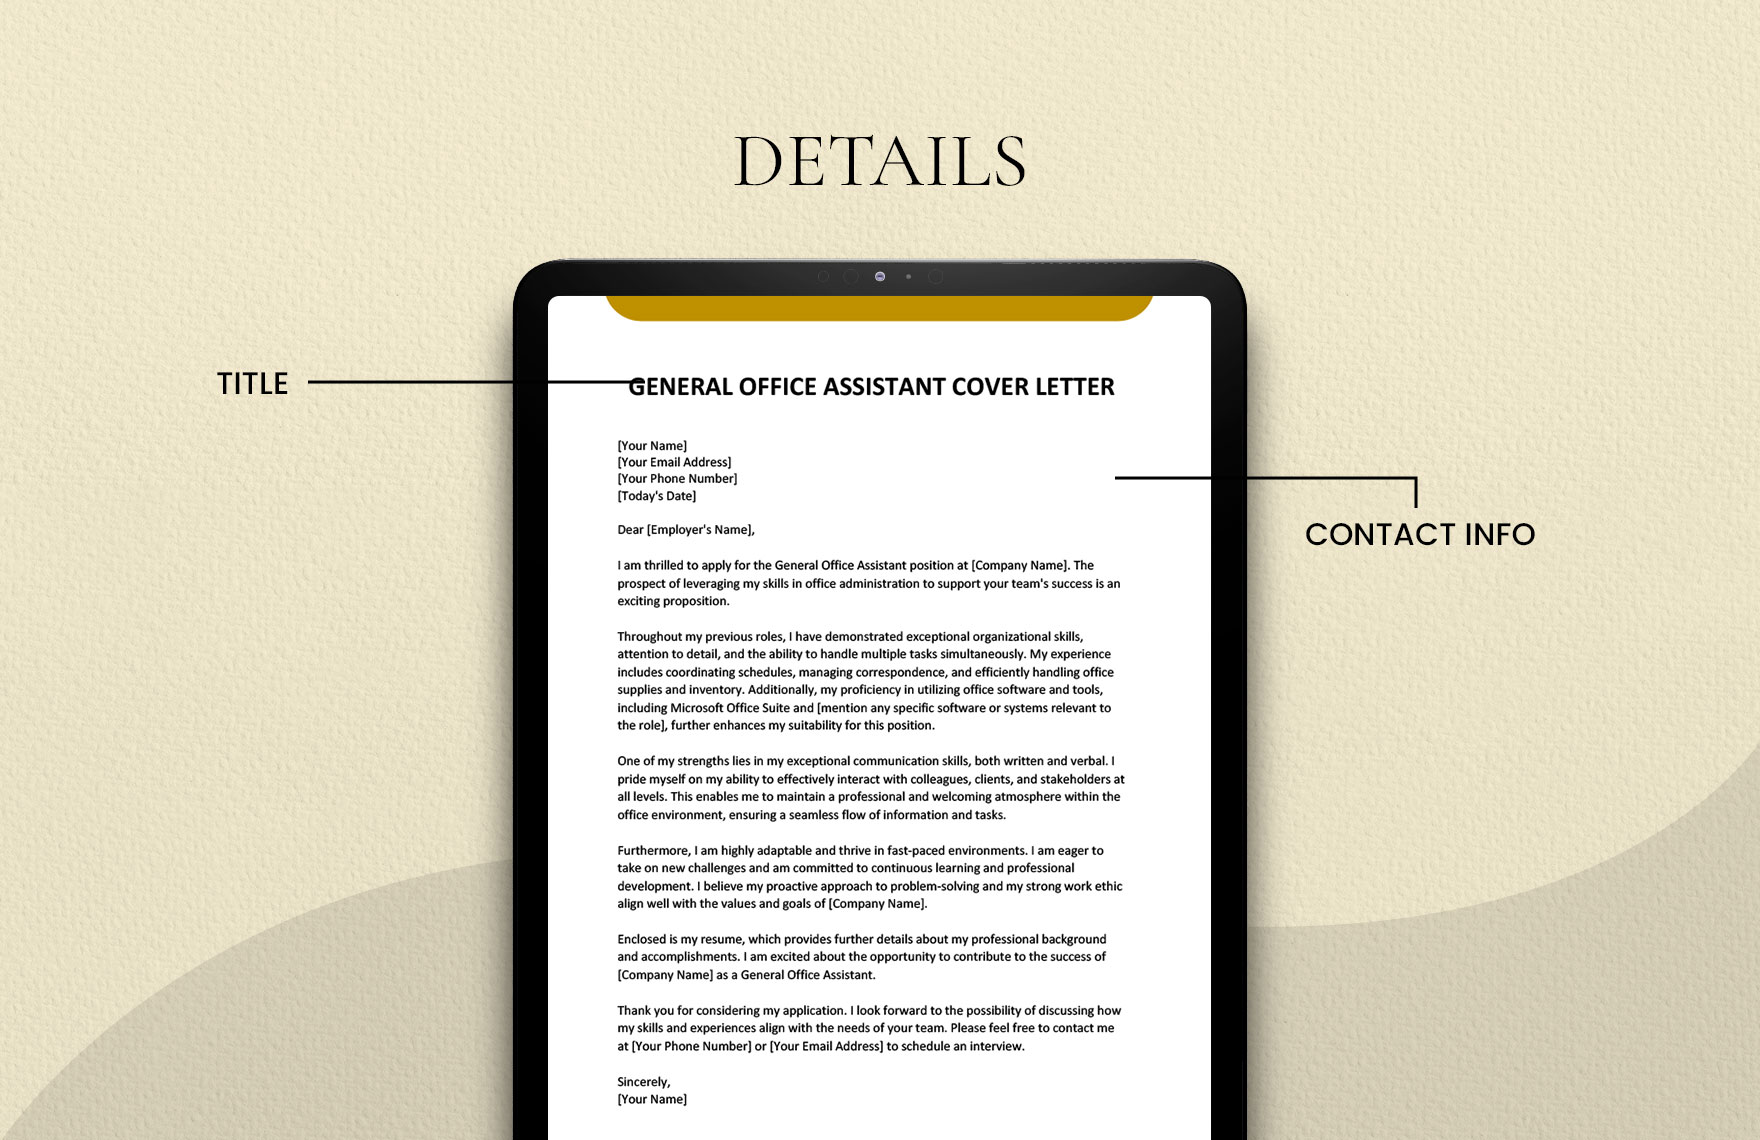 General Office Assistant Cover Letter